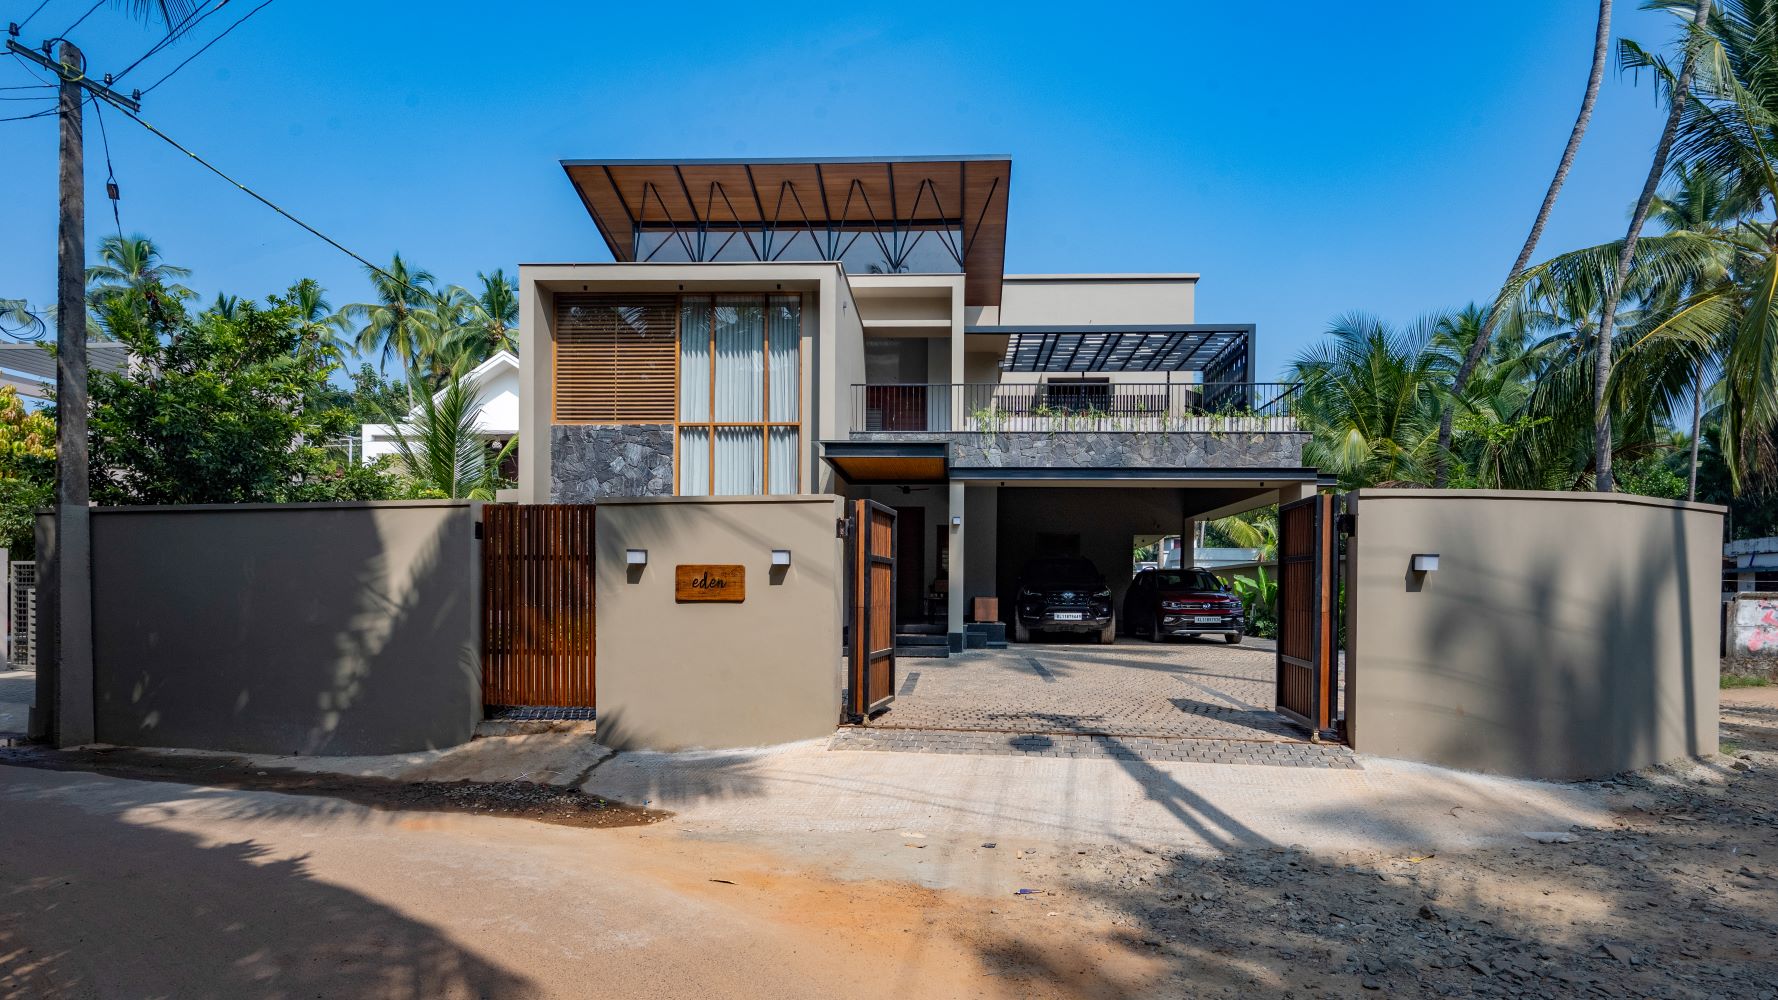 Entrance to Eden, Calicut, India, by Greenline Architects. Photograph by Nathan Photos